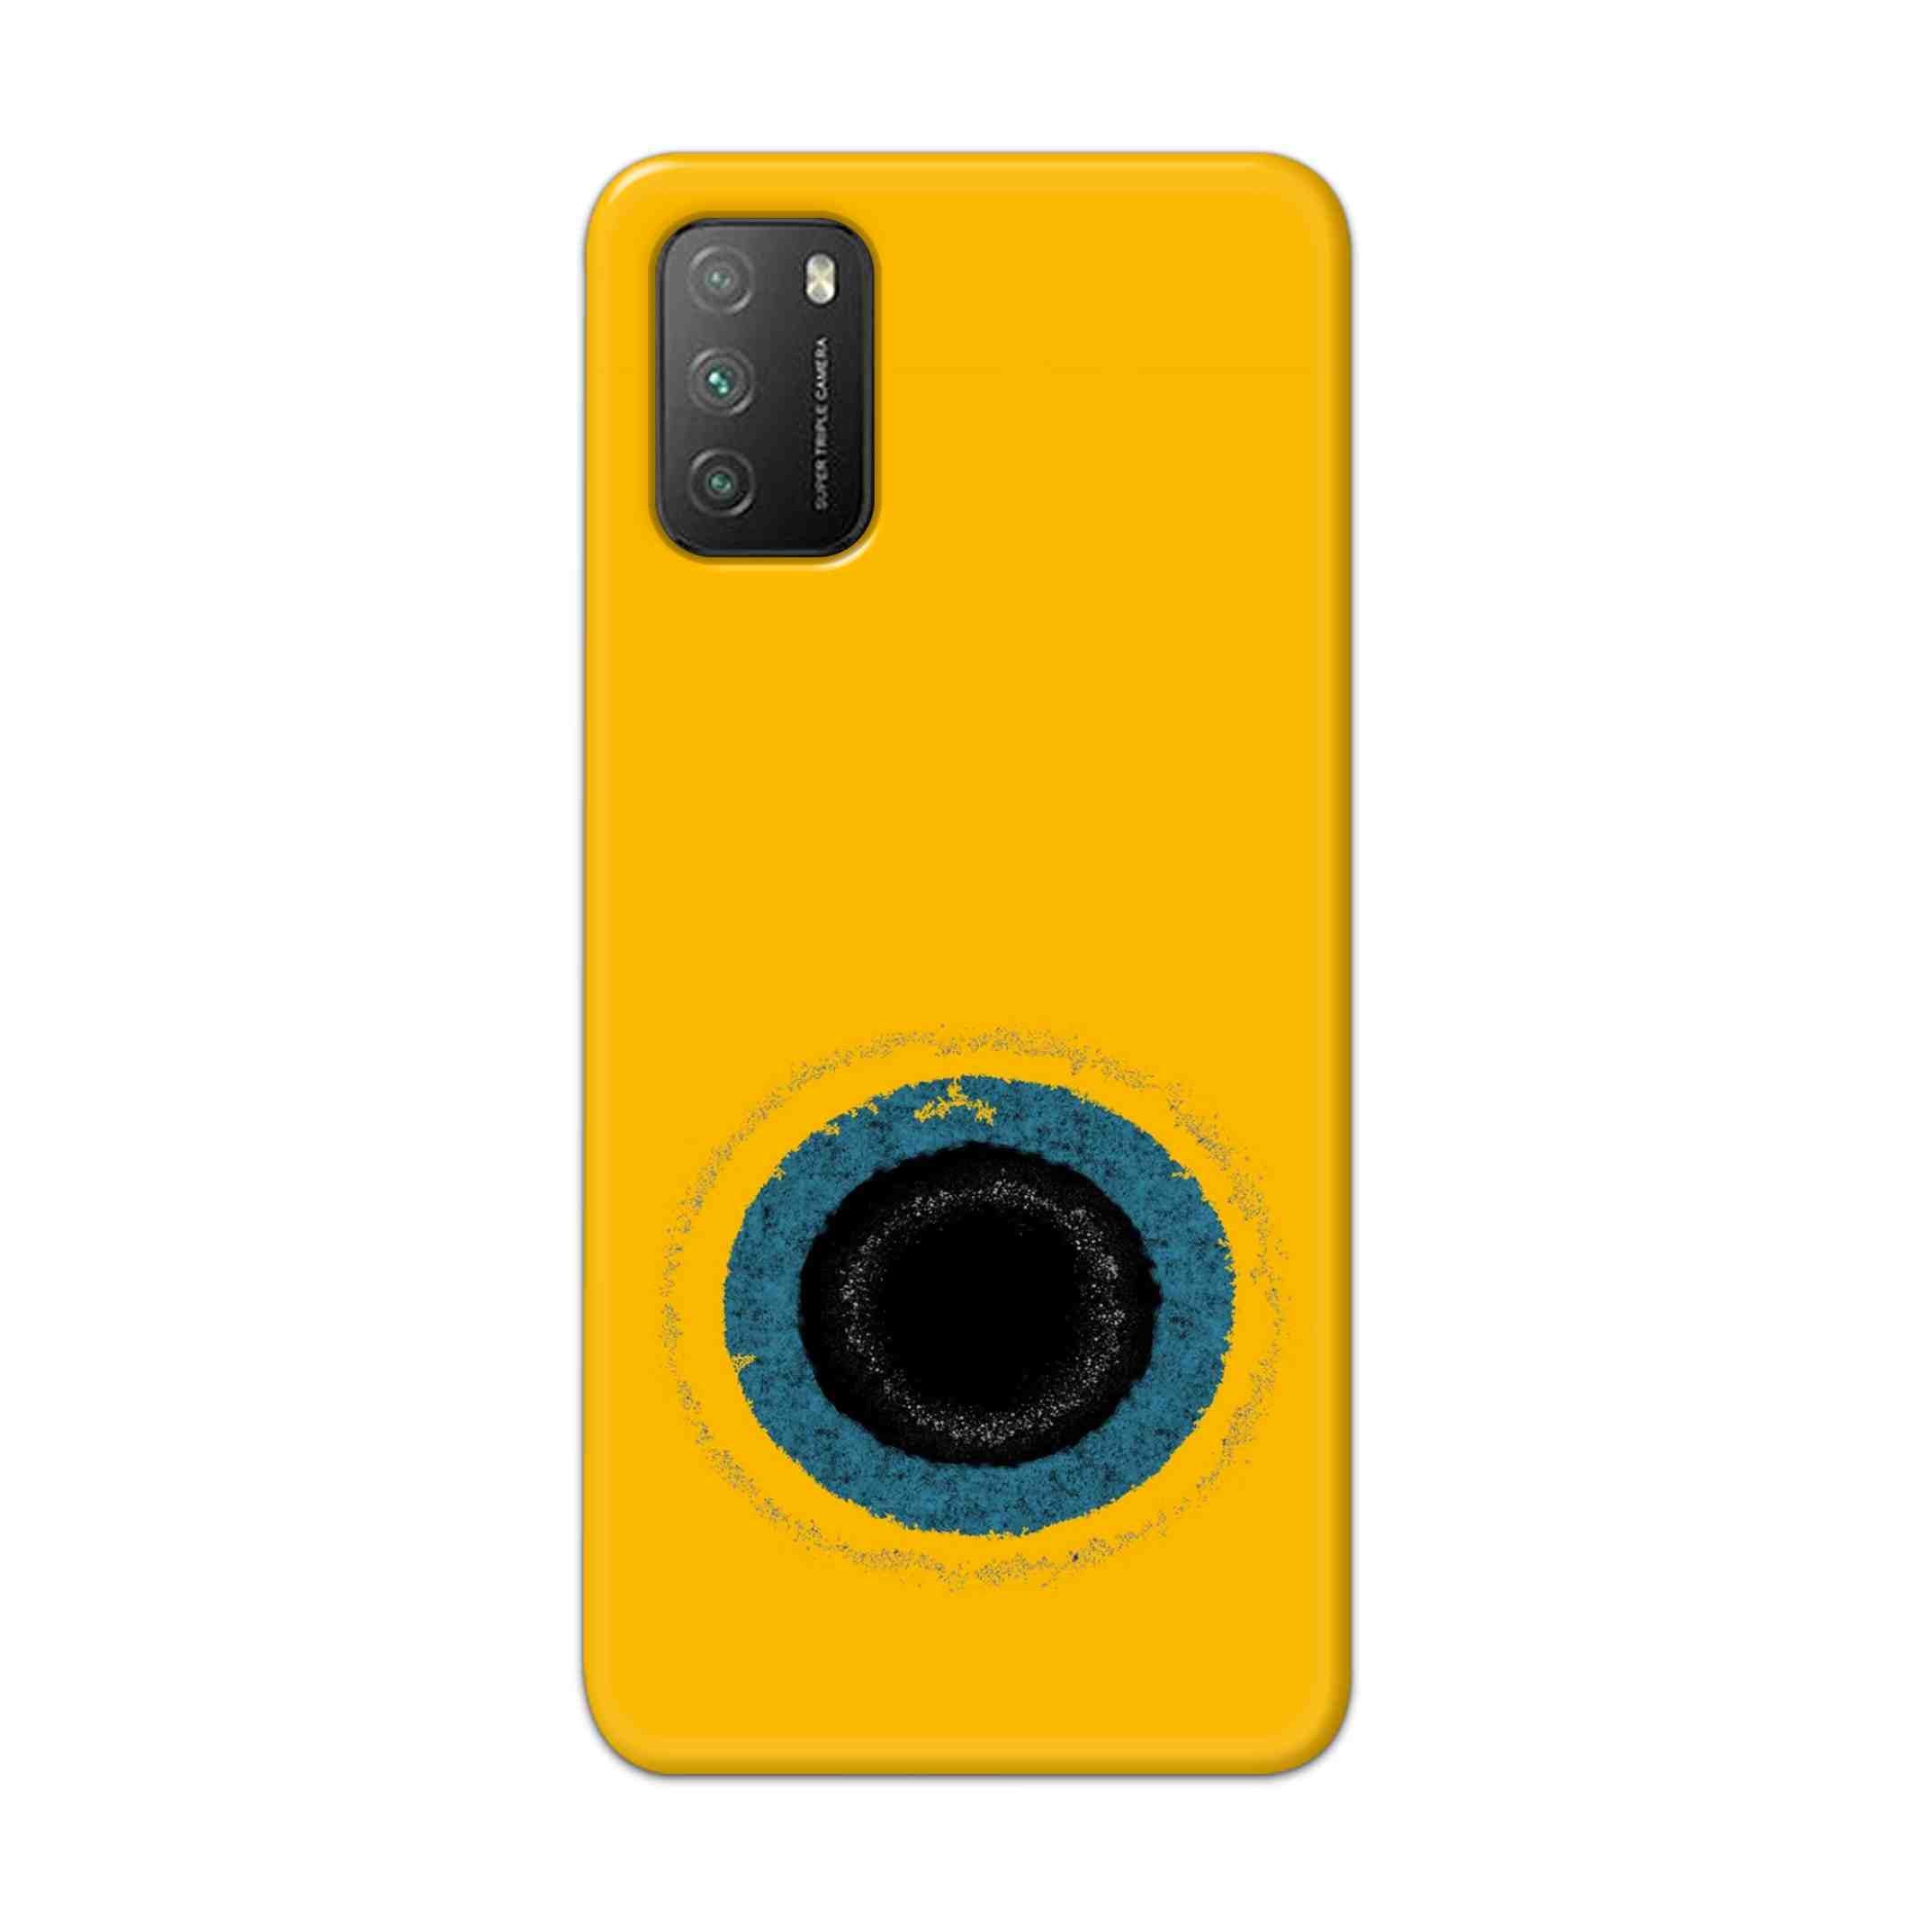 Buy Dark Hole With Yellow Background Hard Back Mobile Phone Case Cover For Poco M3 Online